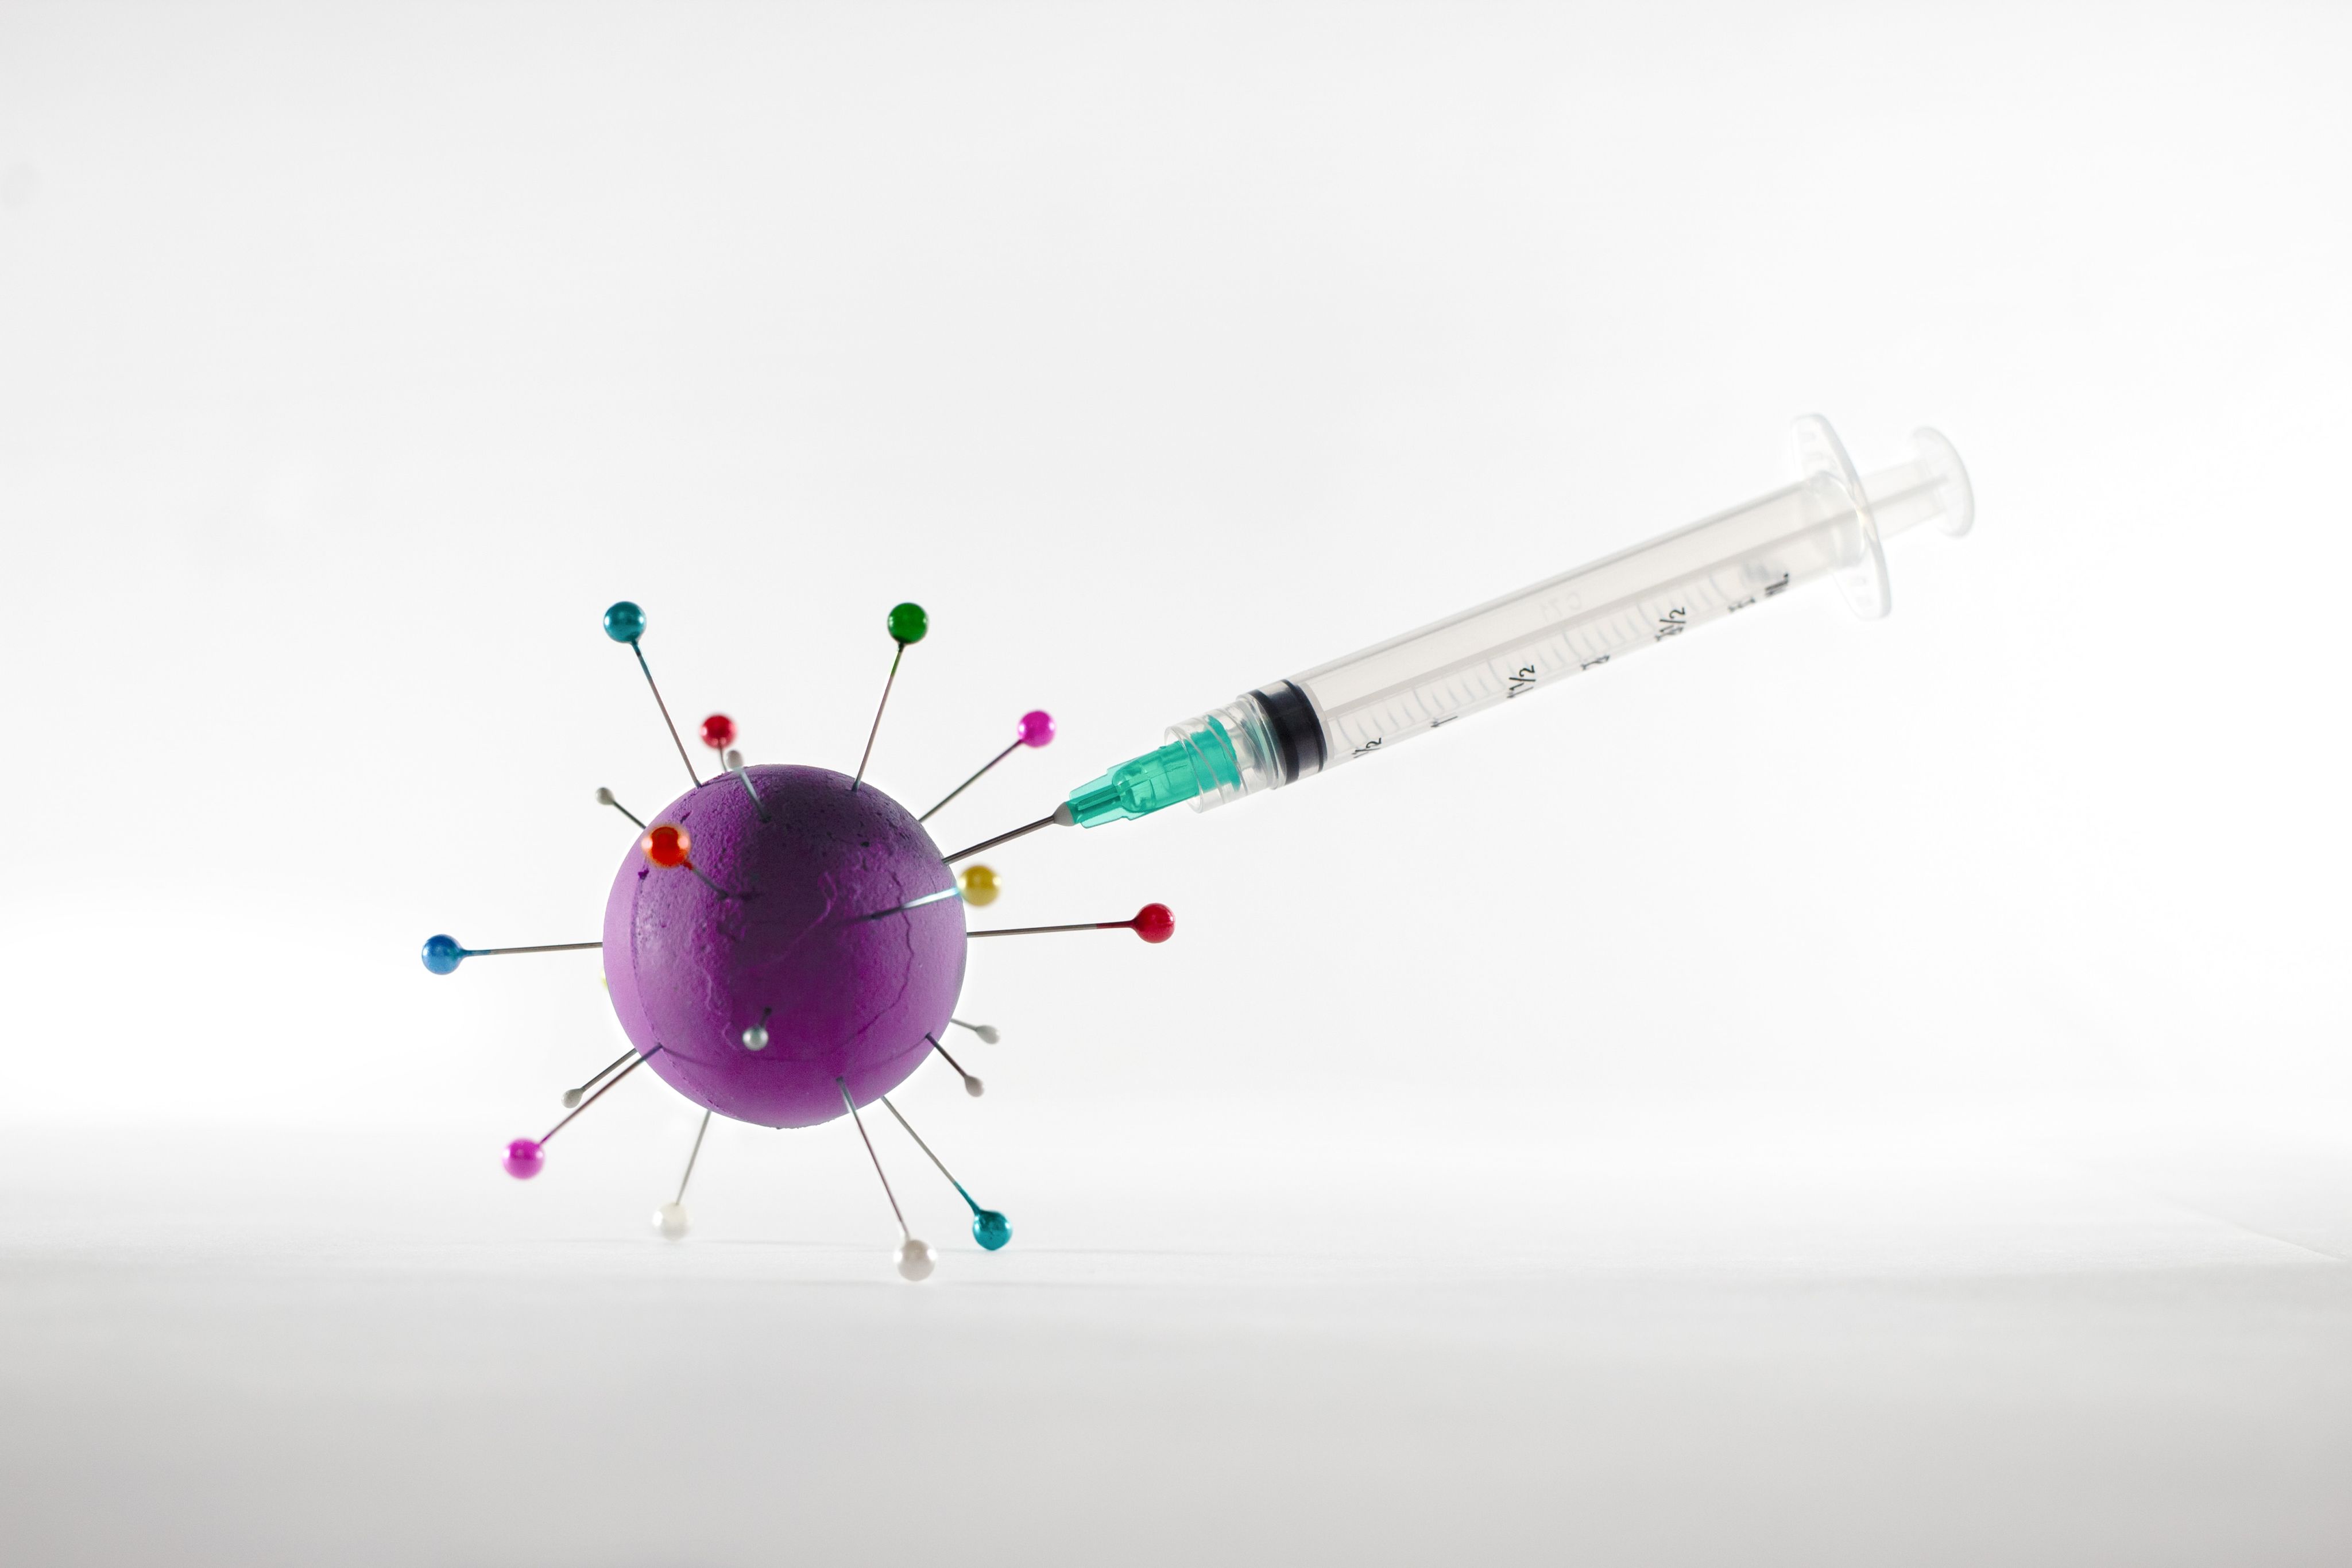 white and green syringe on white surface, injecting a vaccine into a representation of a virus